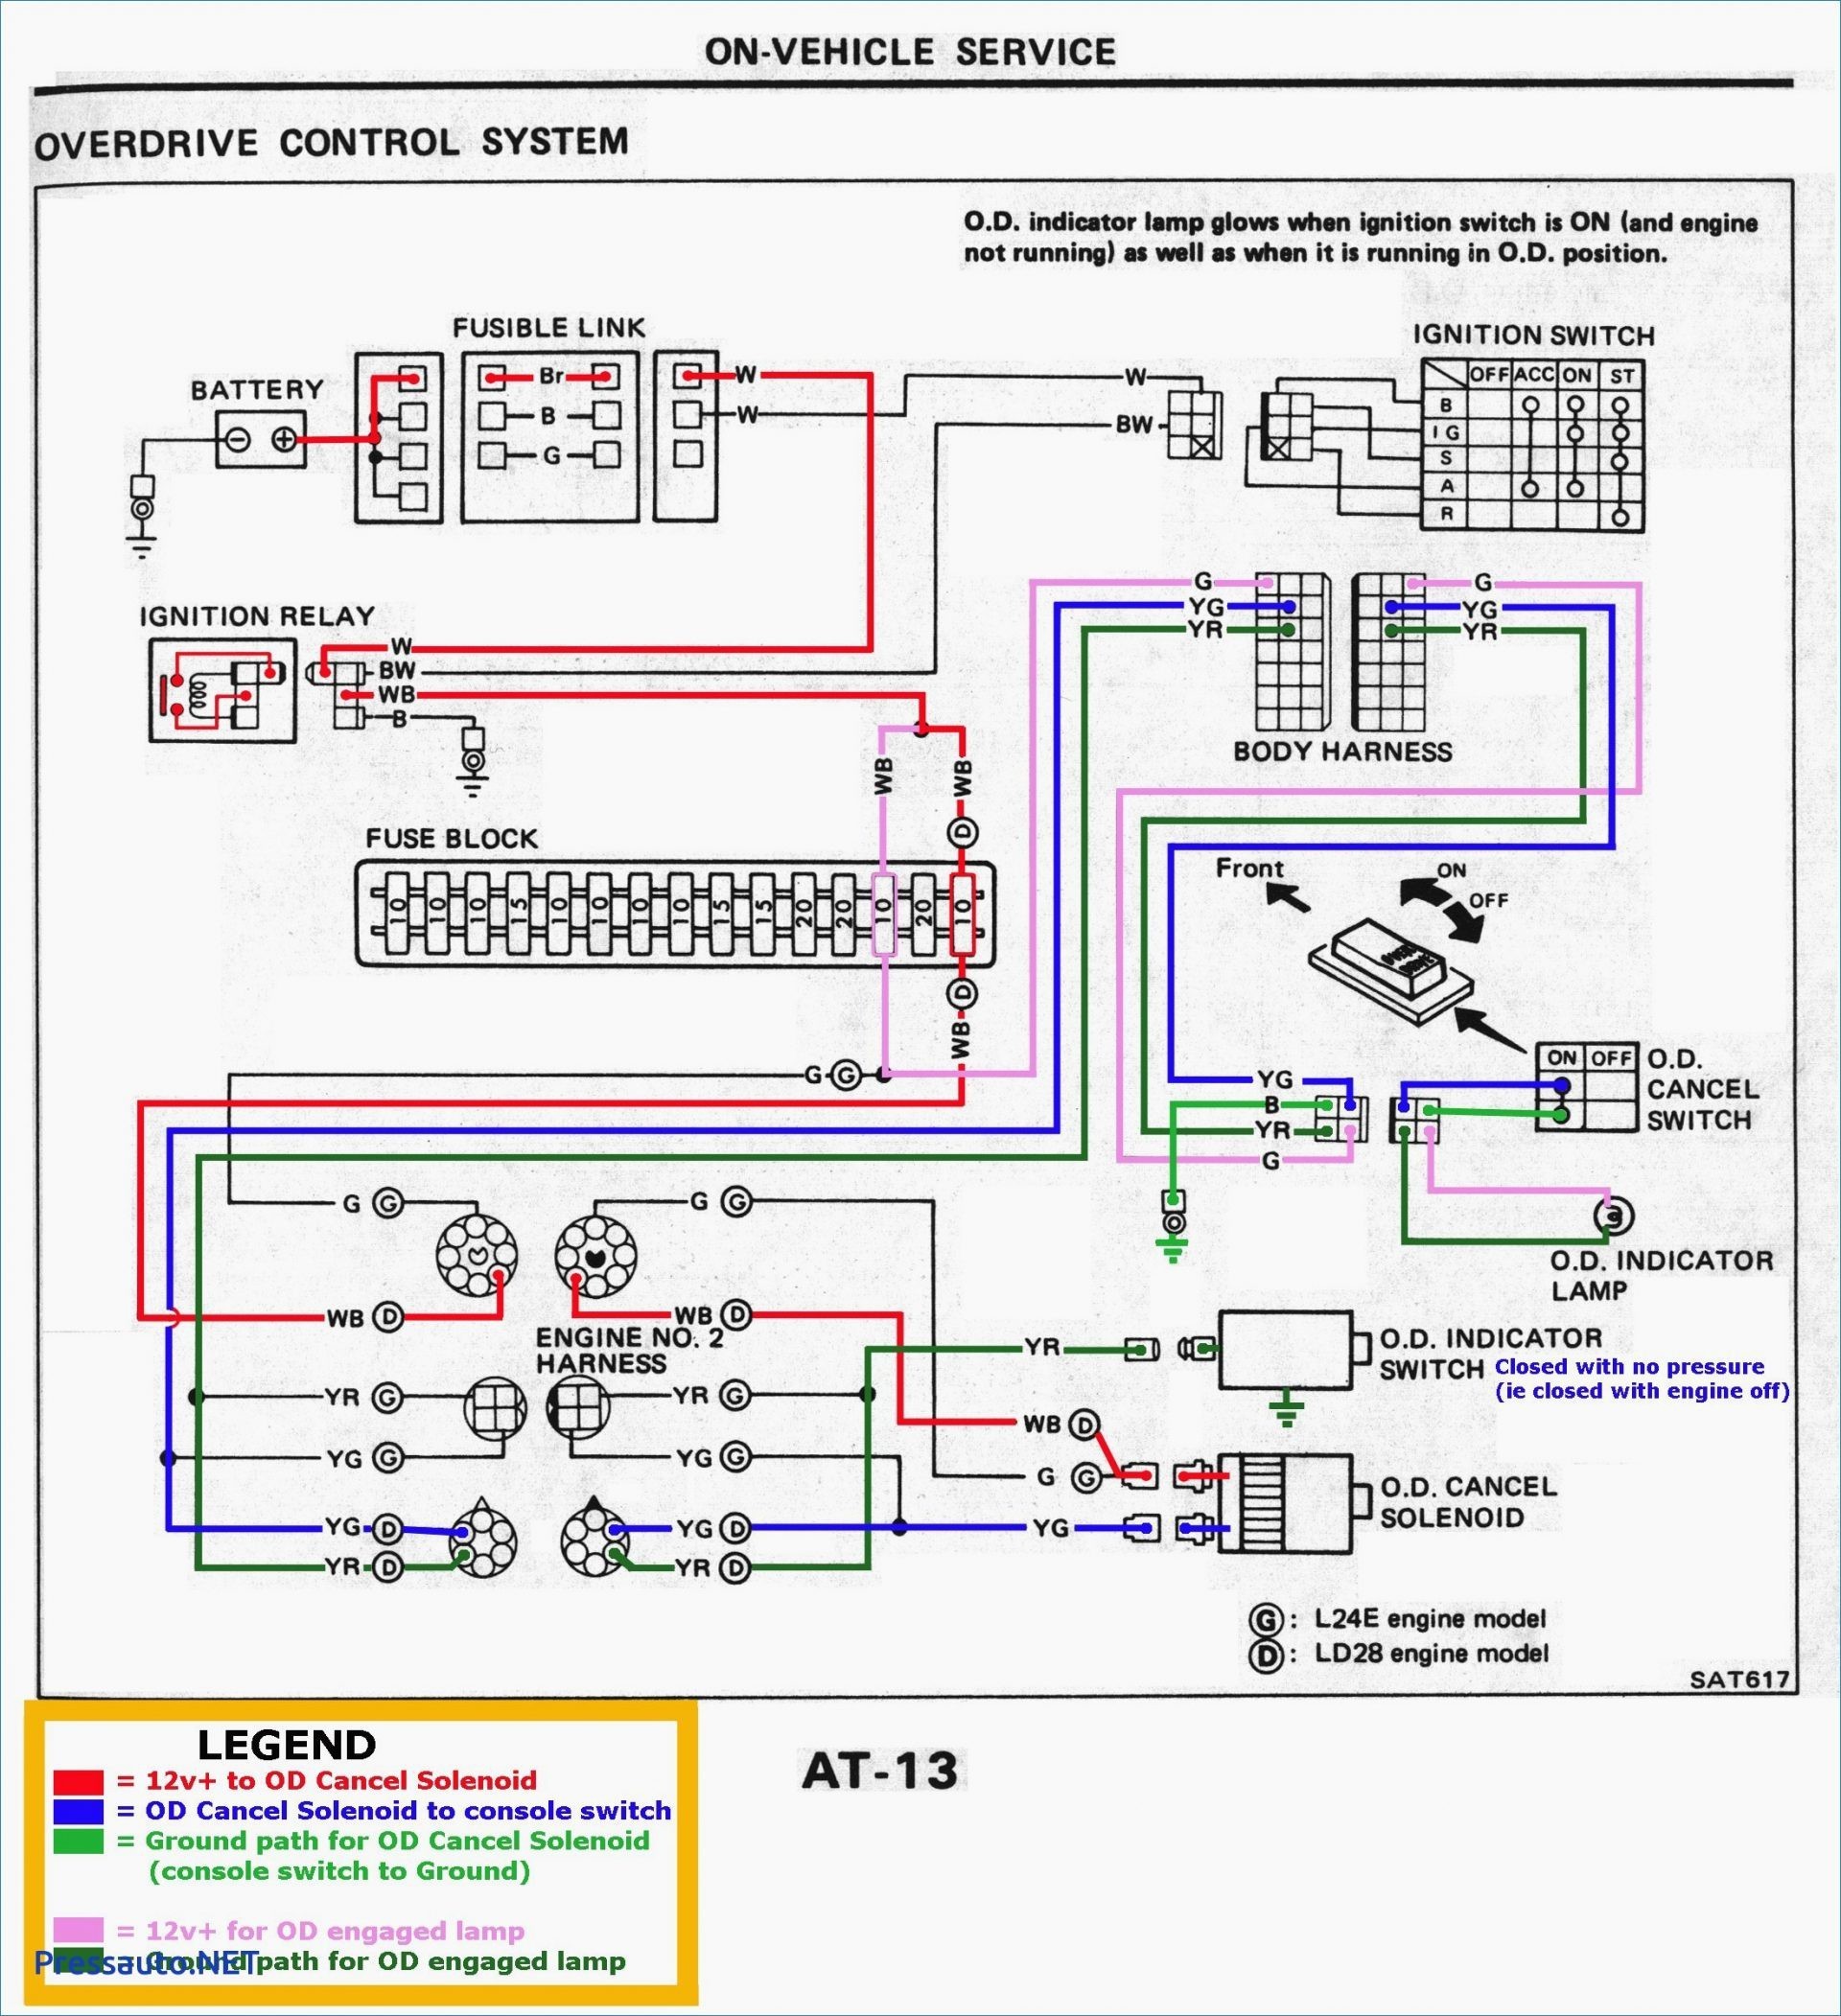 Toyota Pickup Tail Light Wiring Diagram Fuel Pump 89 Sle Wires 89 Chevy Truck Wiring Diagram